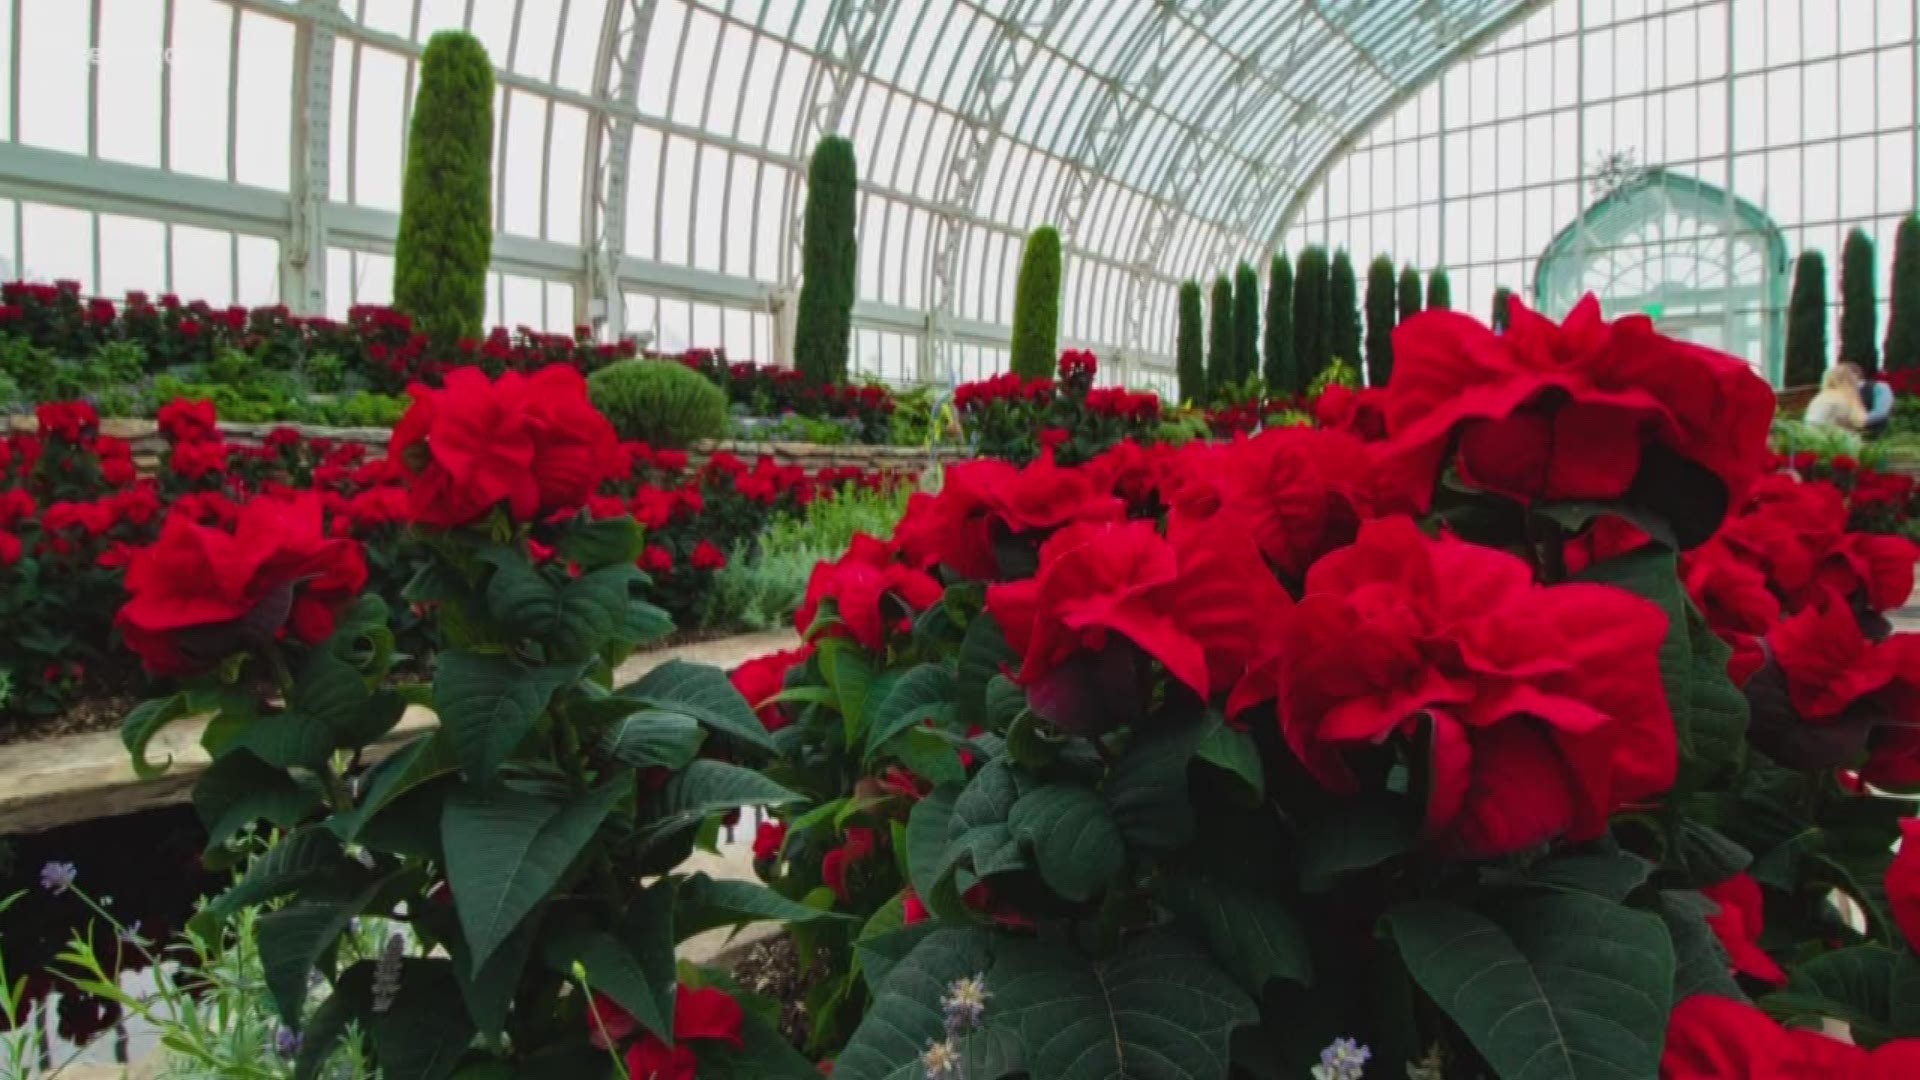 Ellery McCardle visits a conservatory in the winter to see the poinsettias.